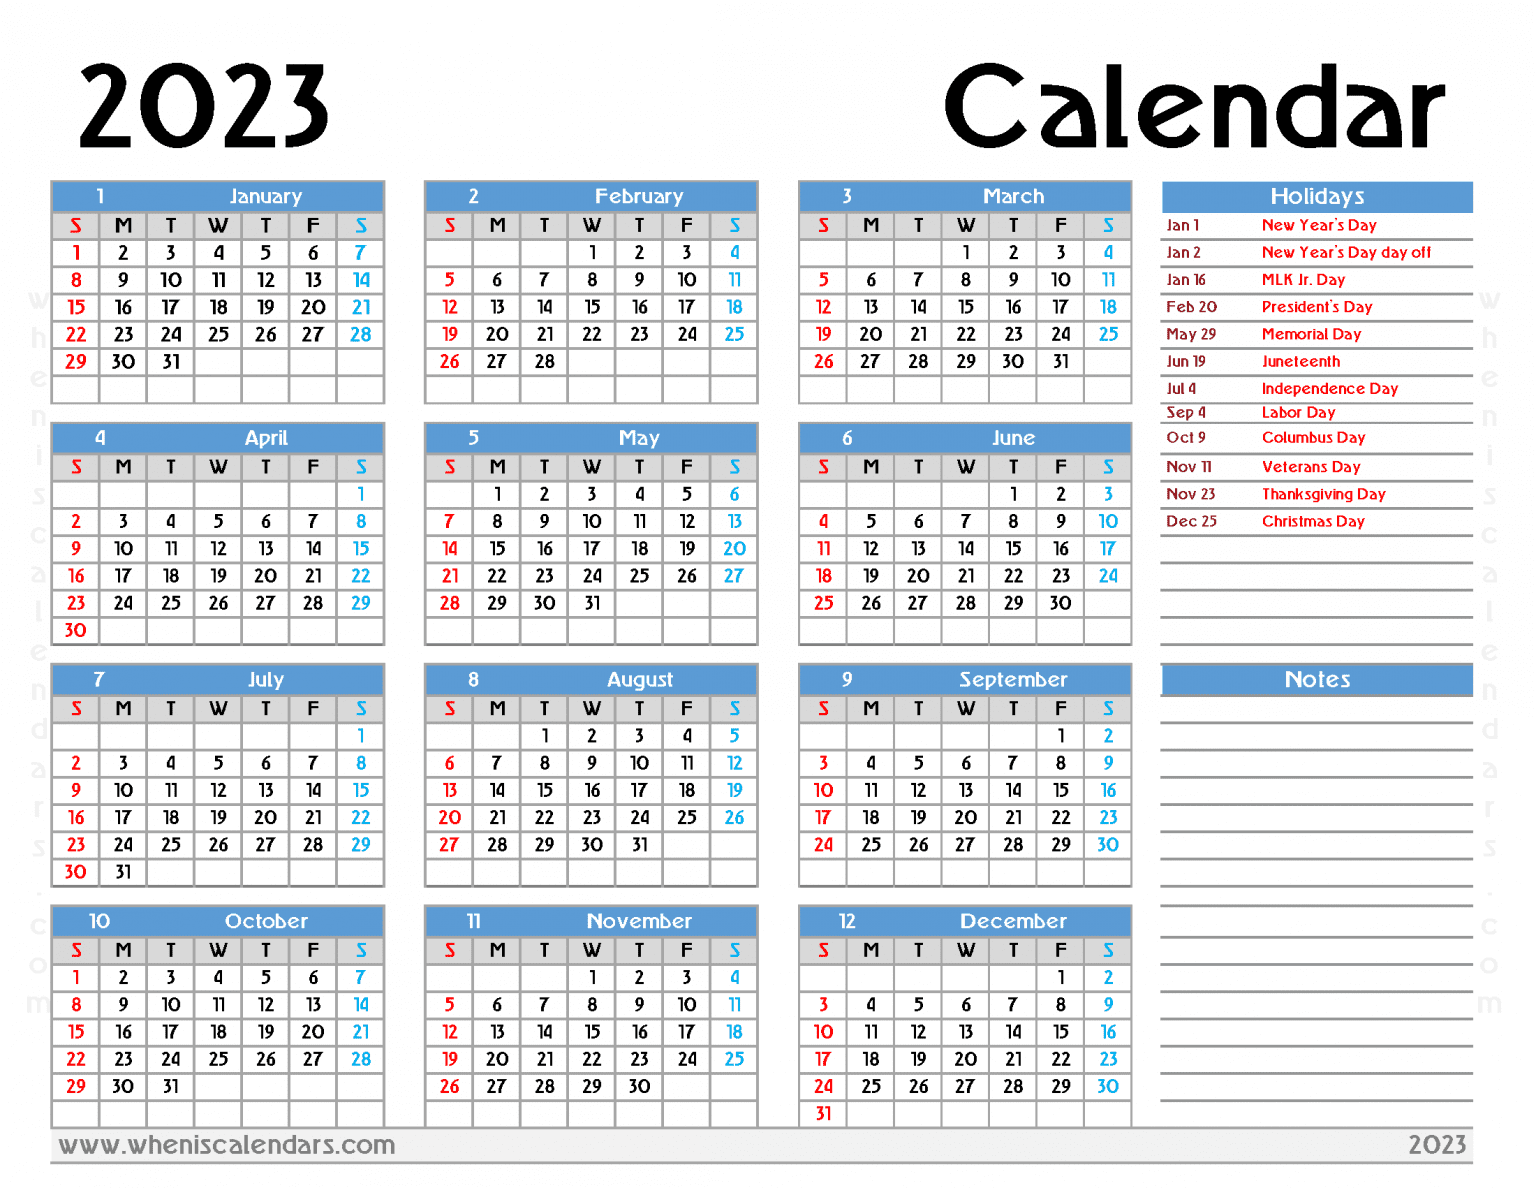 Free Printable 2023 Calendar With Holidays PDF In Landscape And Portrait